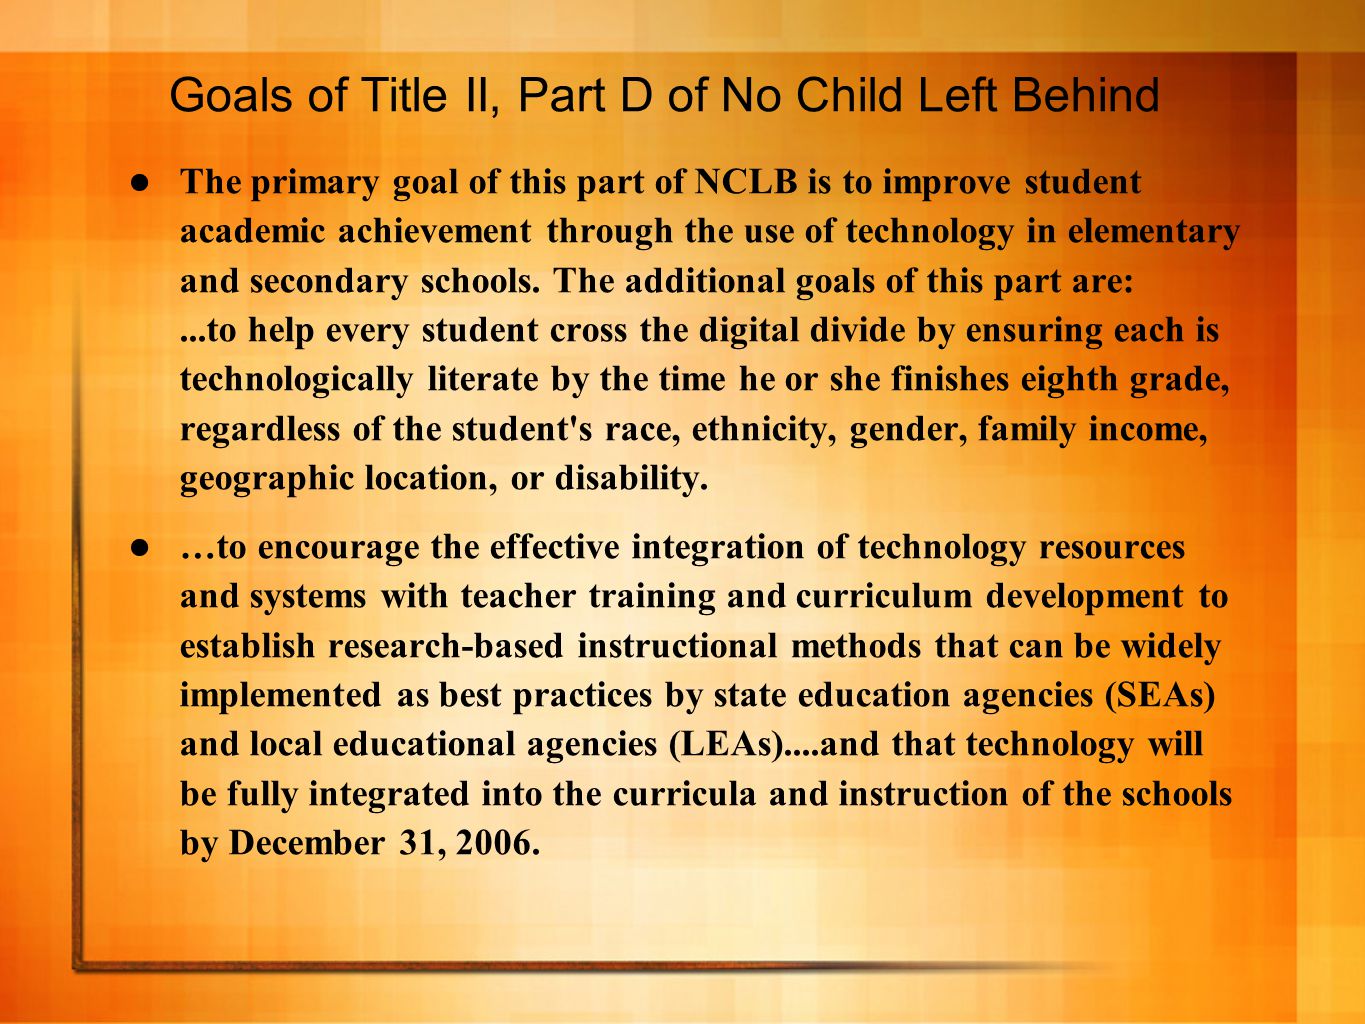 Goals of Title II, Part D of No Child Left Behind The primary goal of this part of NCLB is to improve student academic achievement through the use of technology in elementary and secondary schools.